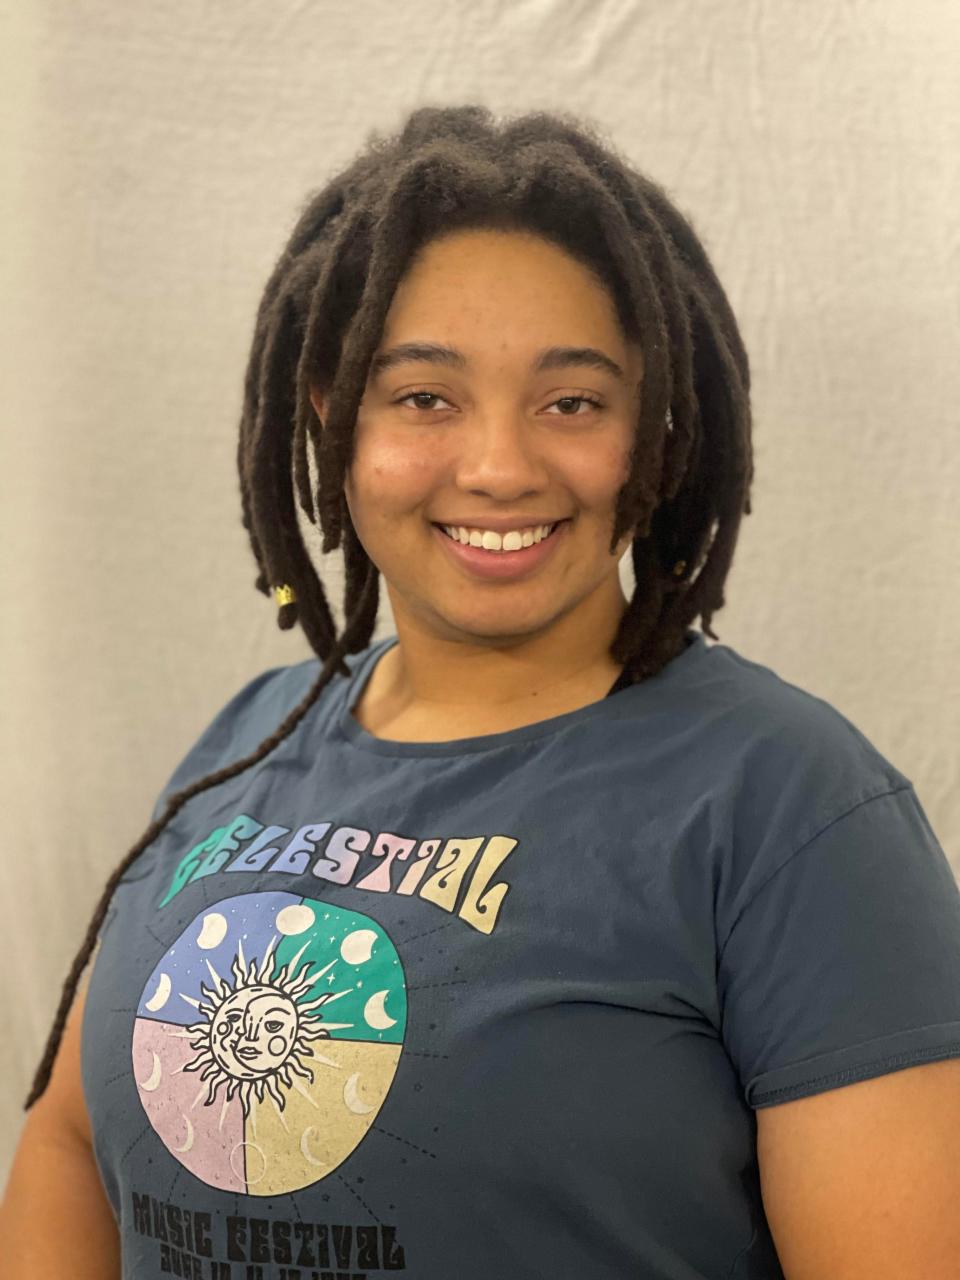 Cameron Dumas graduated from Southeastern Louisiana University with a major in criminal justice. Near the end of her time in college she narrowed her focus to youth justice and intervention.